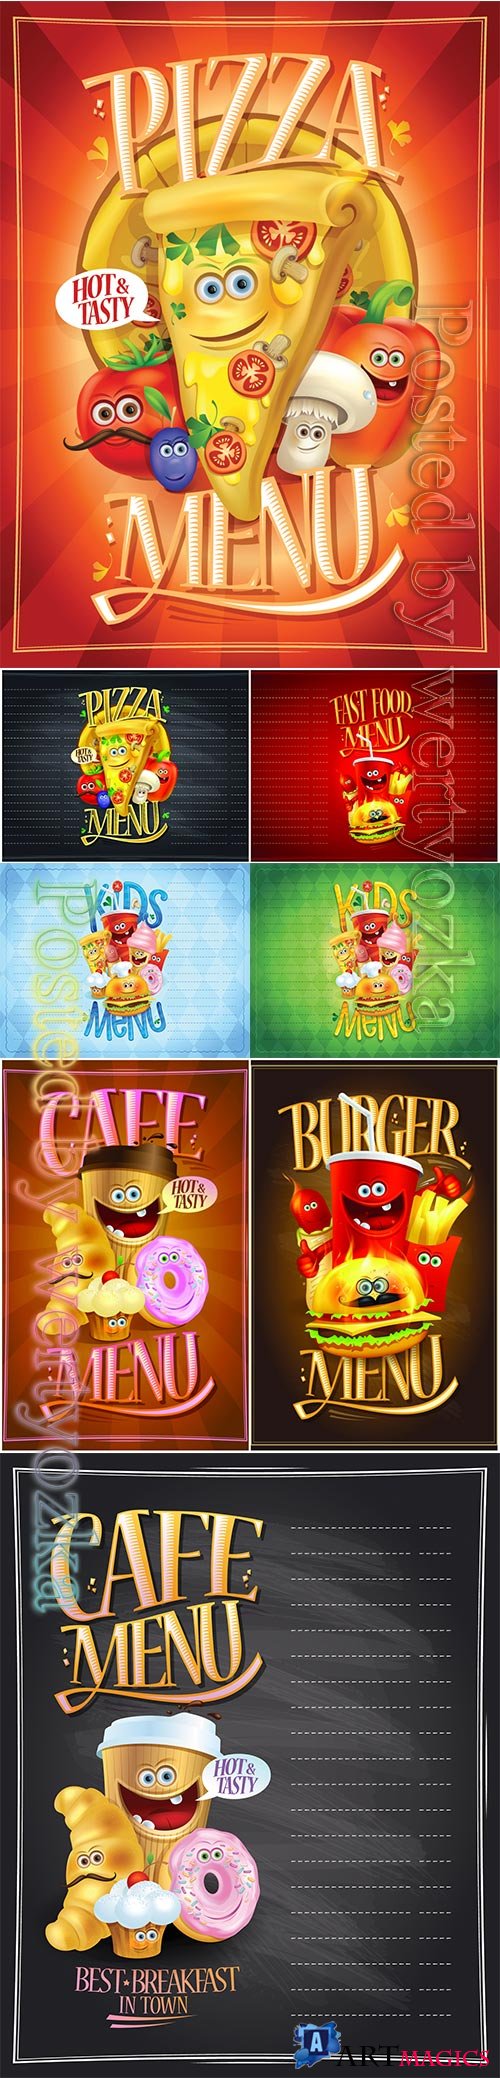 Kids menu list design concept with hot dog, burger, french fries, pizza, donut, ice cream, muffin and drink